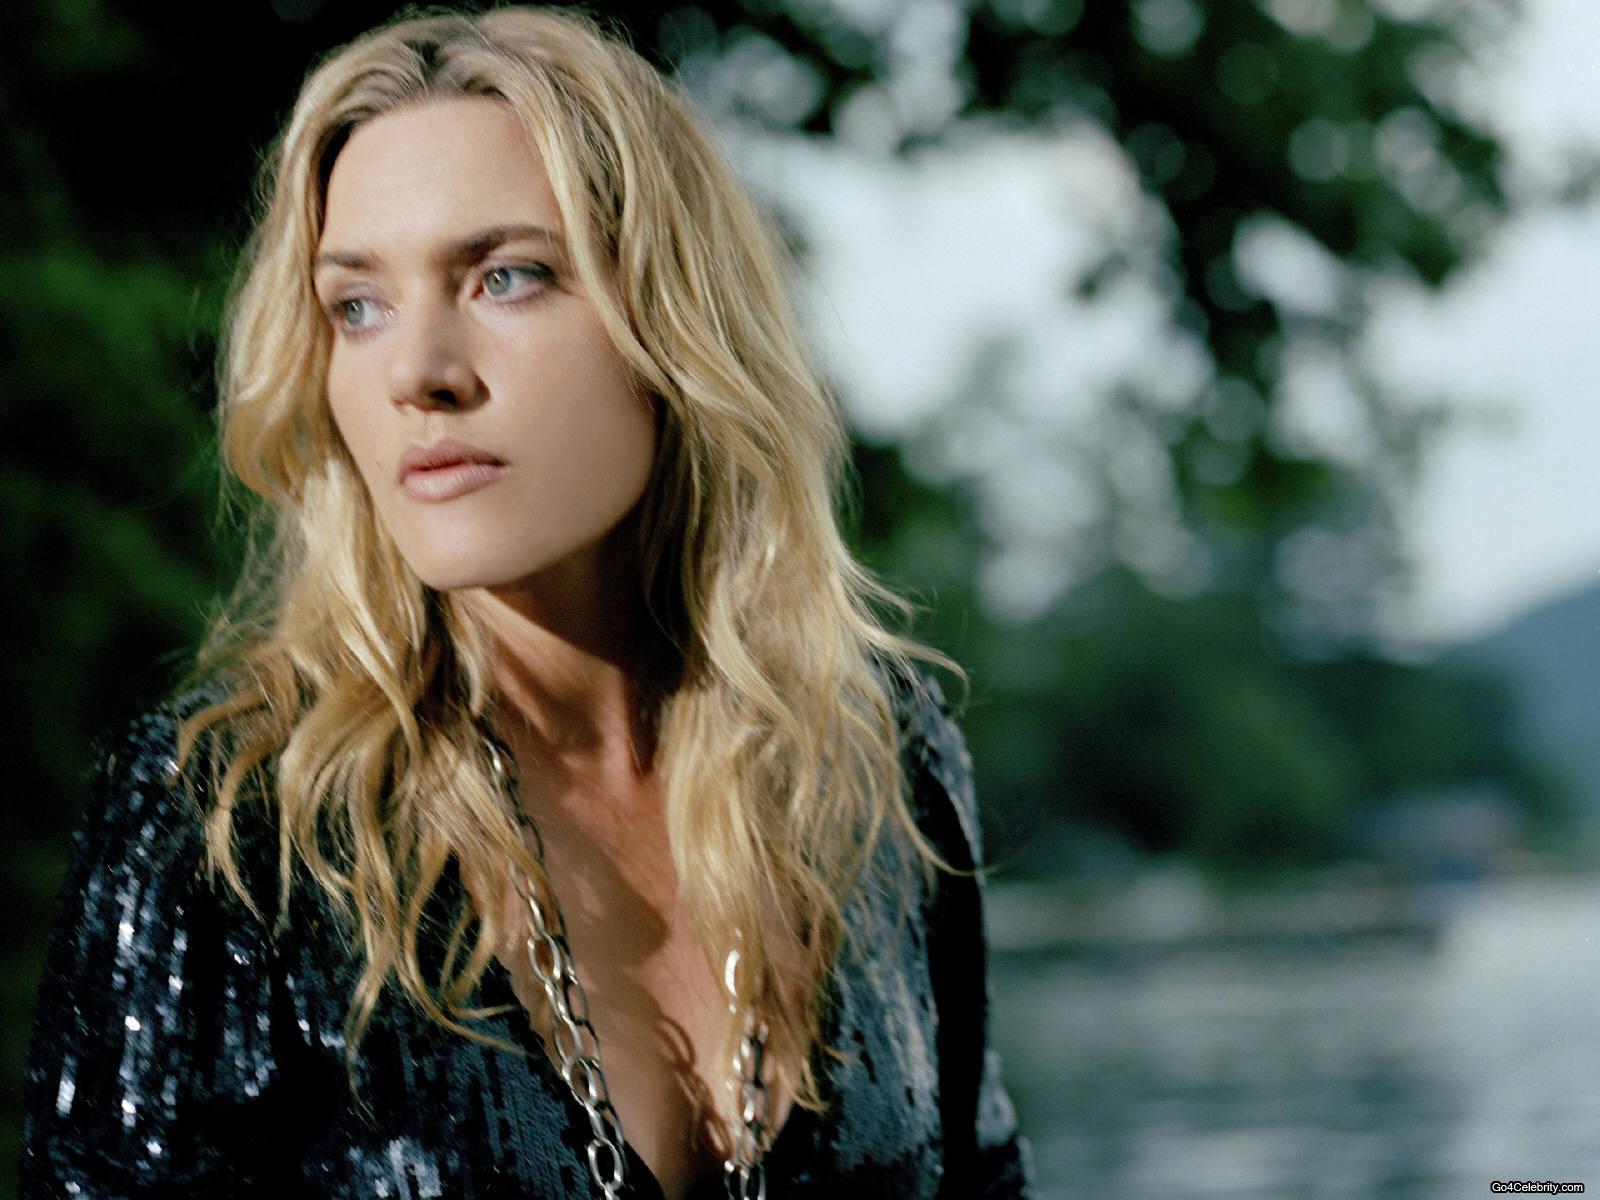 pic new posts: Hd Wallpapers Kate Winslet